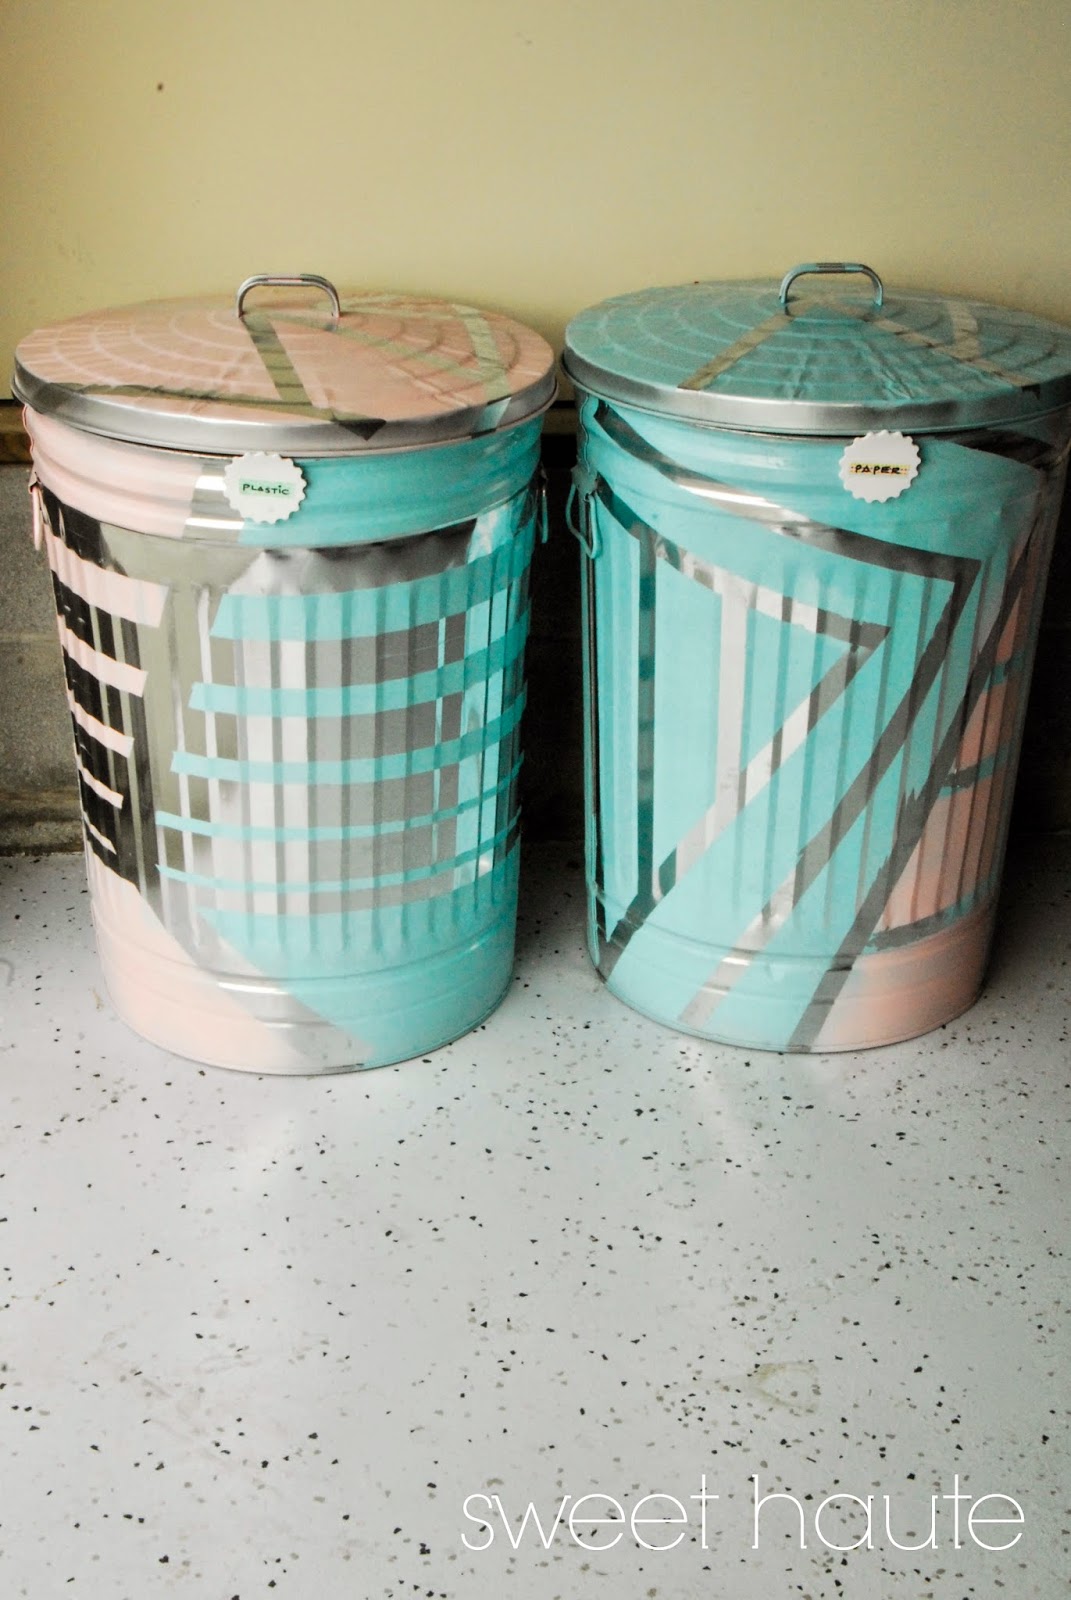 15 Great DIY Recycling Bin Ideas That Will Improve Your Recycling Habits